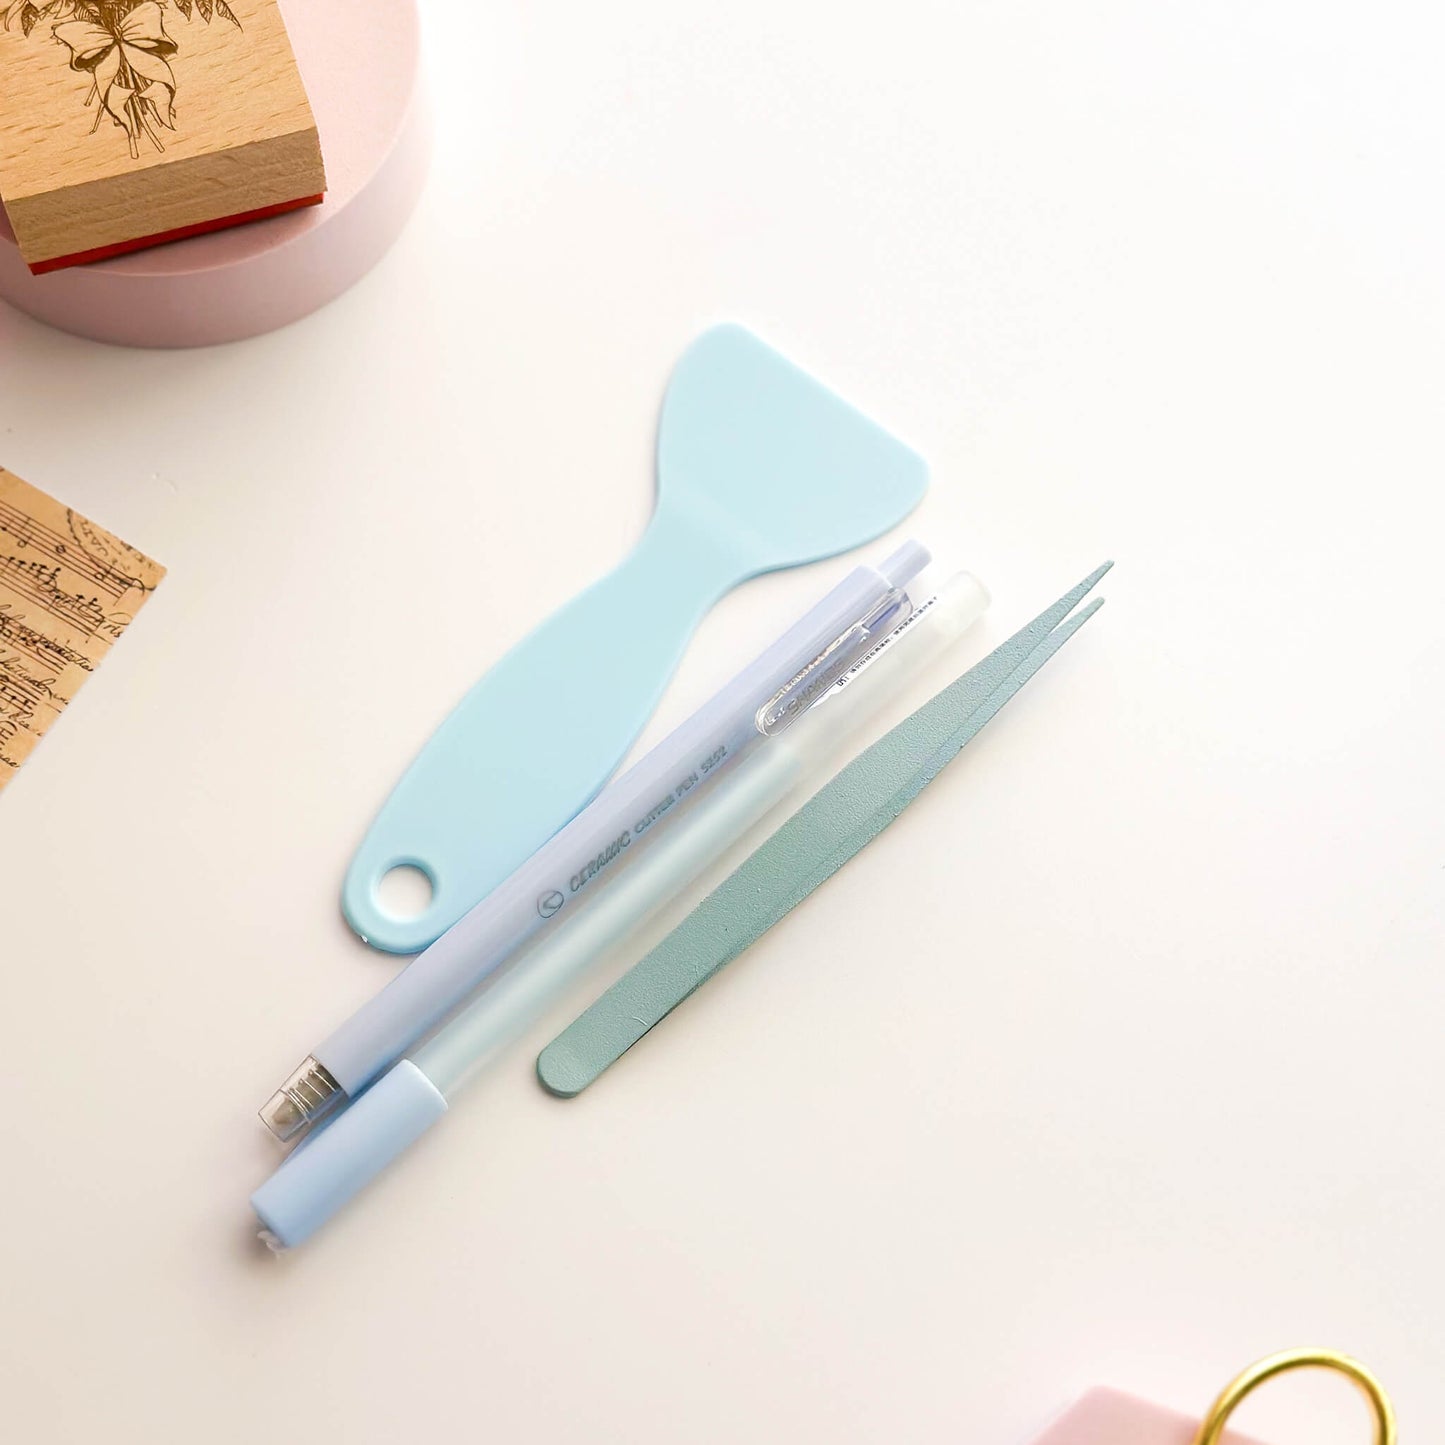 Tool set with tweezers, cutter and glue pen